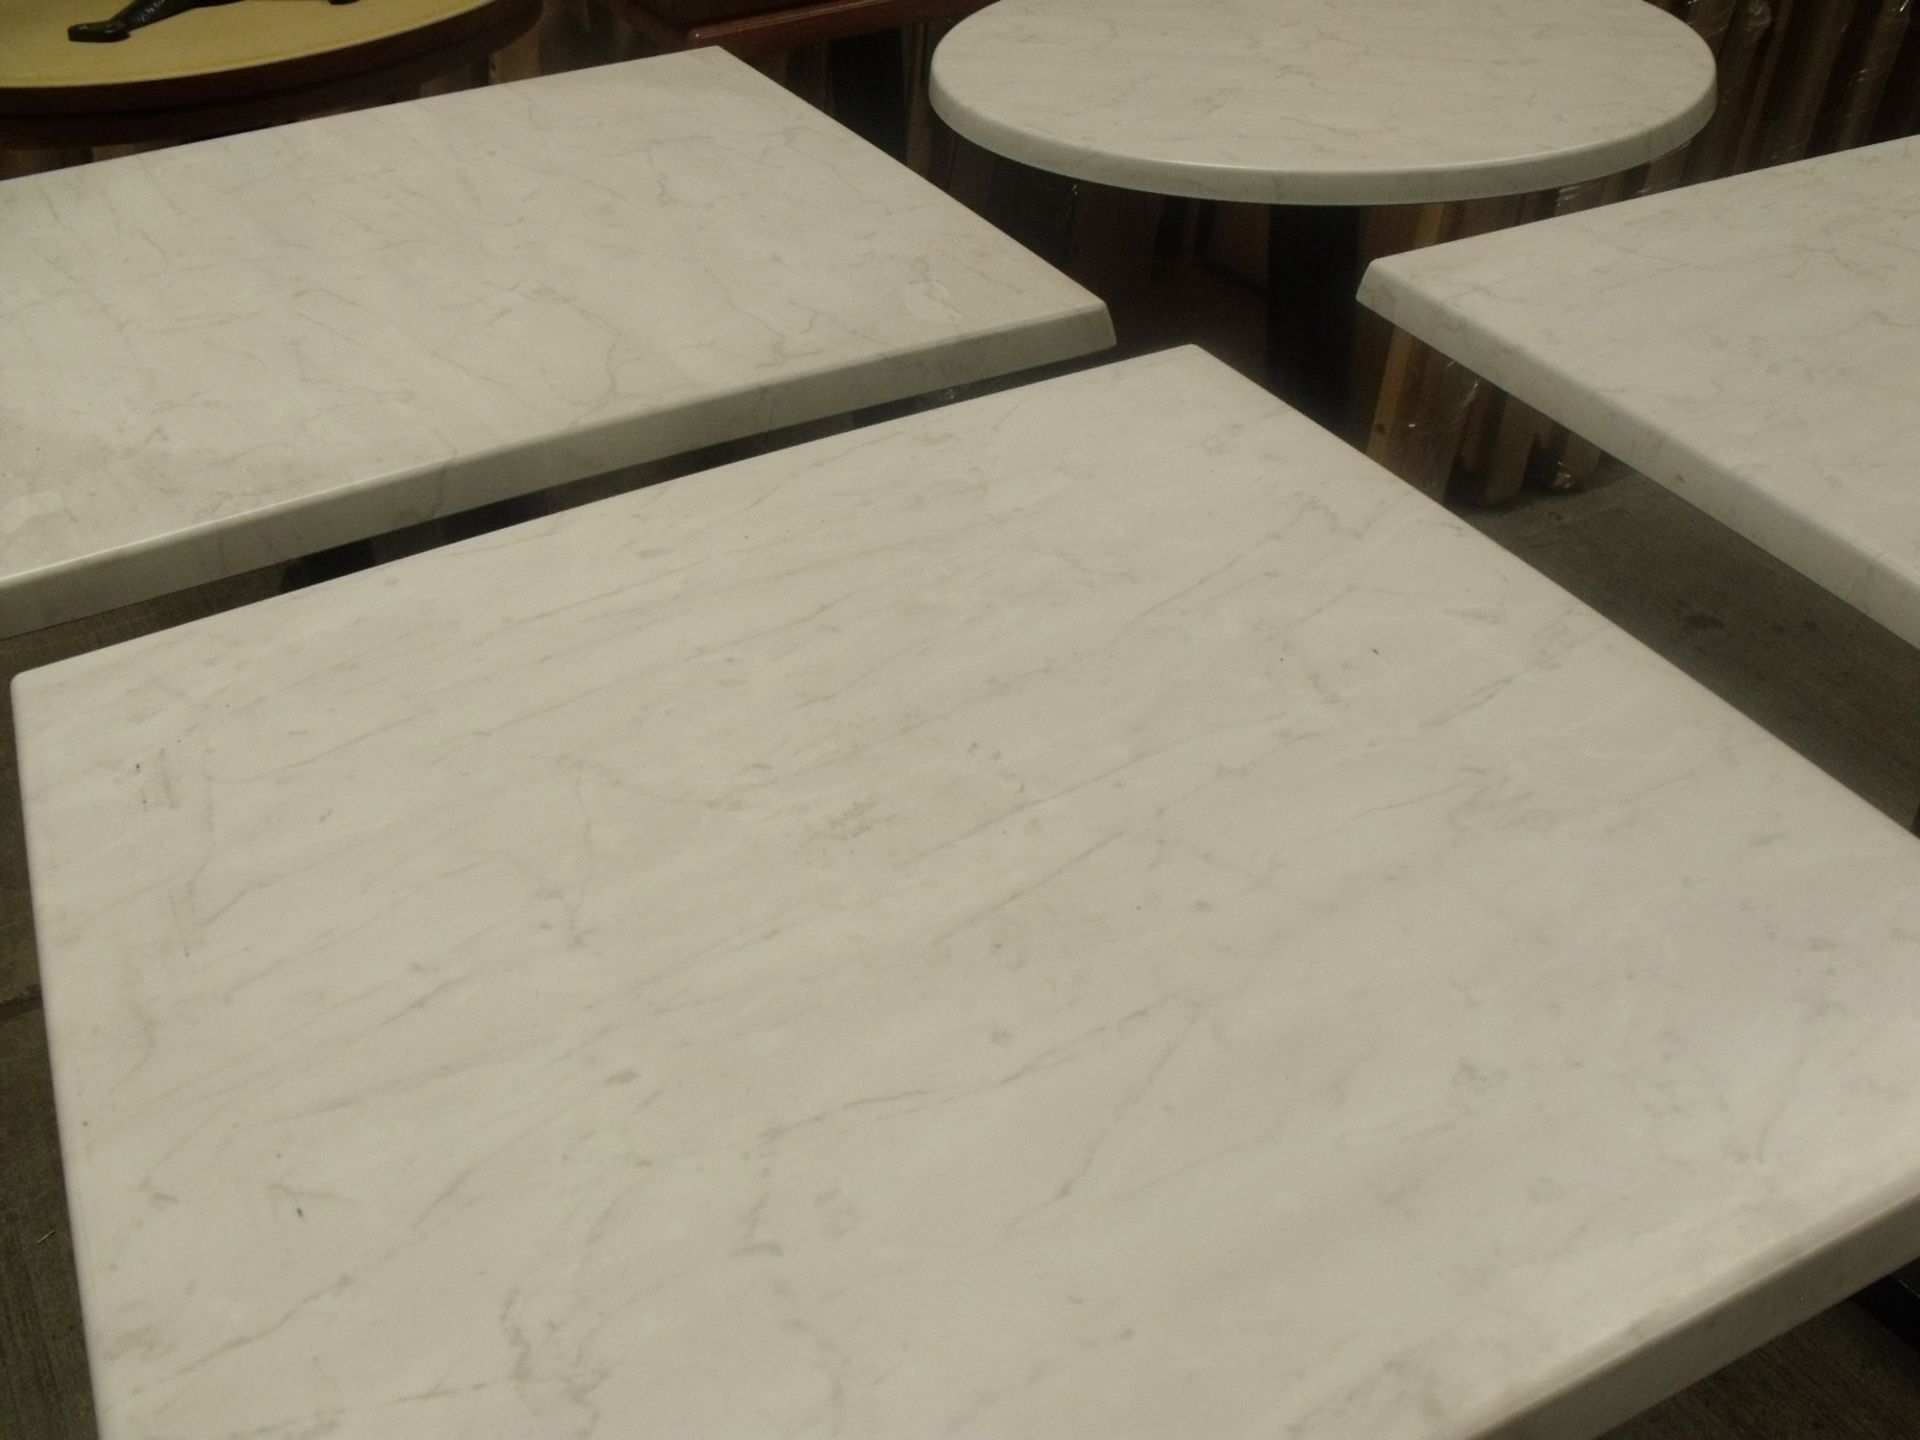 4 x bistro / café tables werzalit tops white marble 1x 600mm round and 3 x 600mm square with black - Image 2 of 2